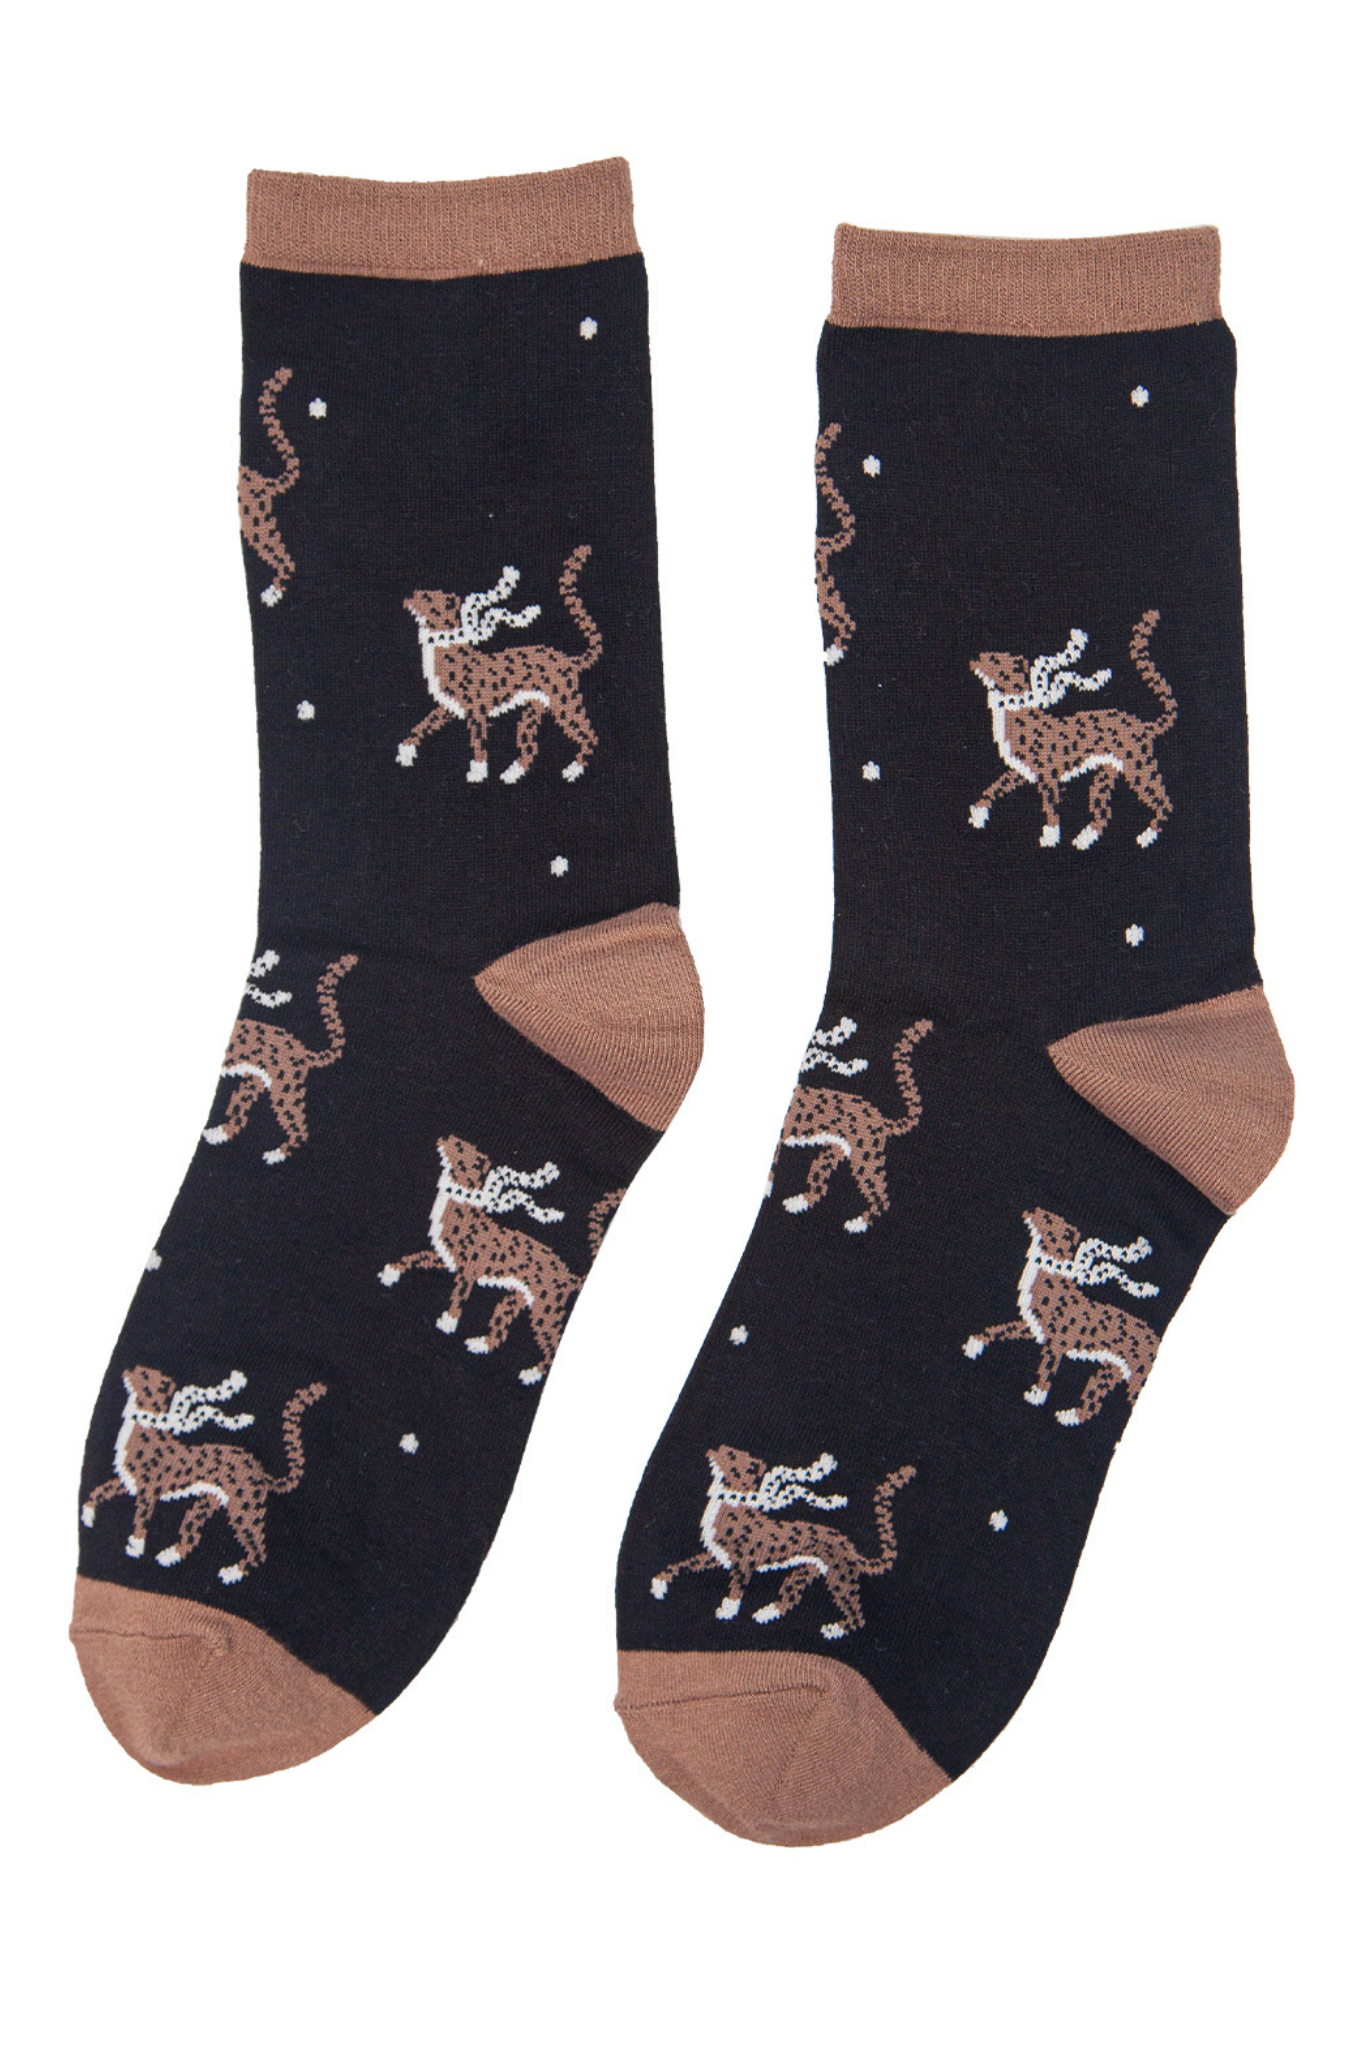 black ankle socks with brown toe, heel and trim with Cheetahs